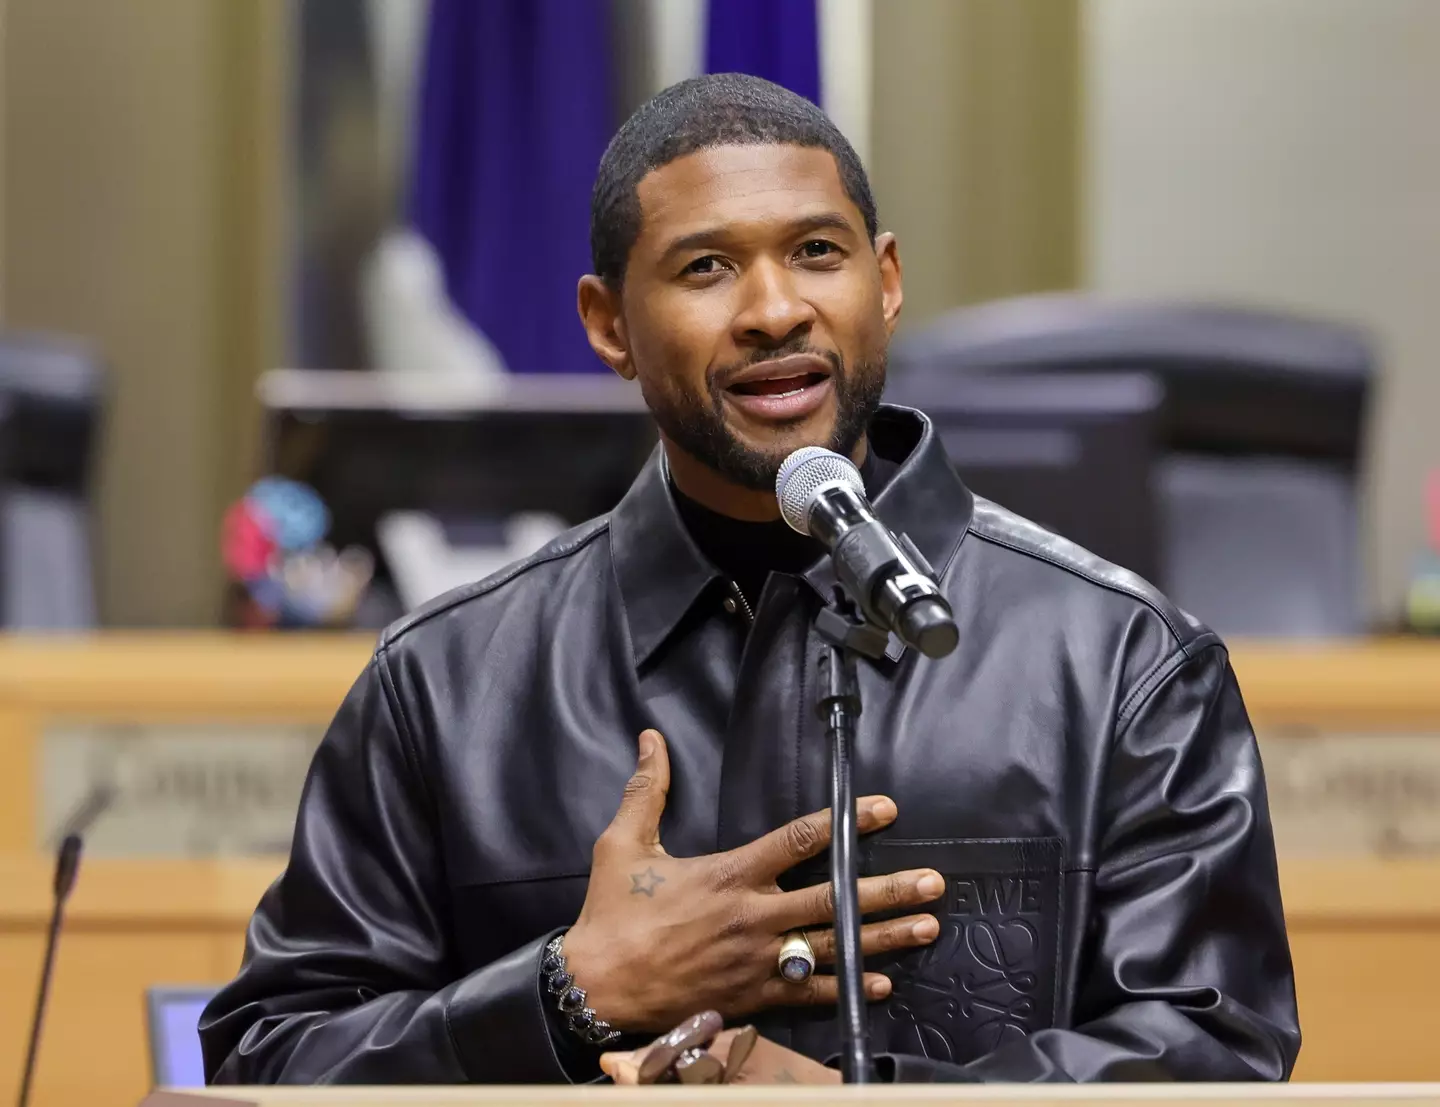 Usher's performance comes two days after the release of his new album.